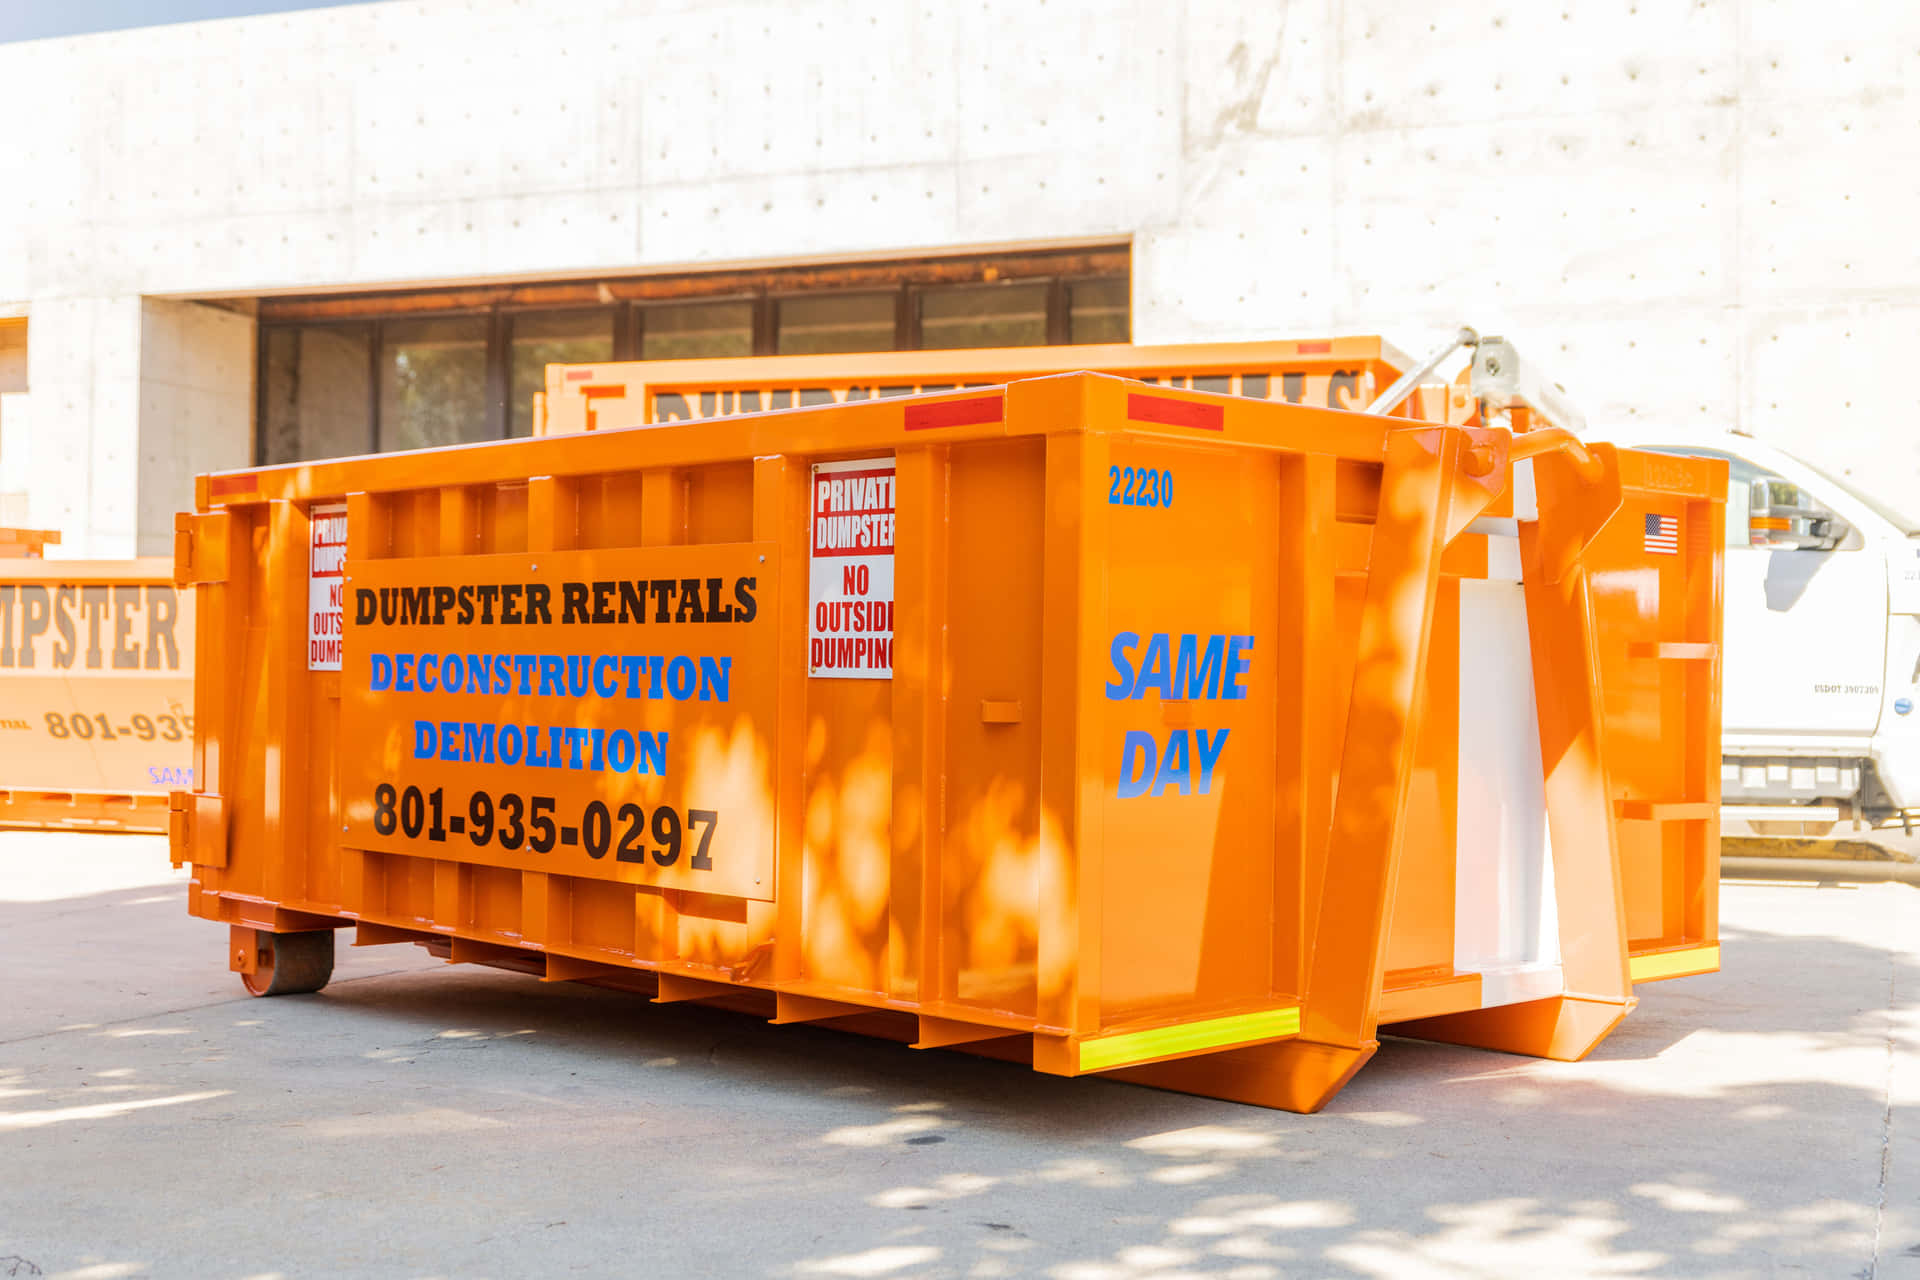 A Large Orange Dumpster Parked In Front Of A Building